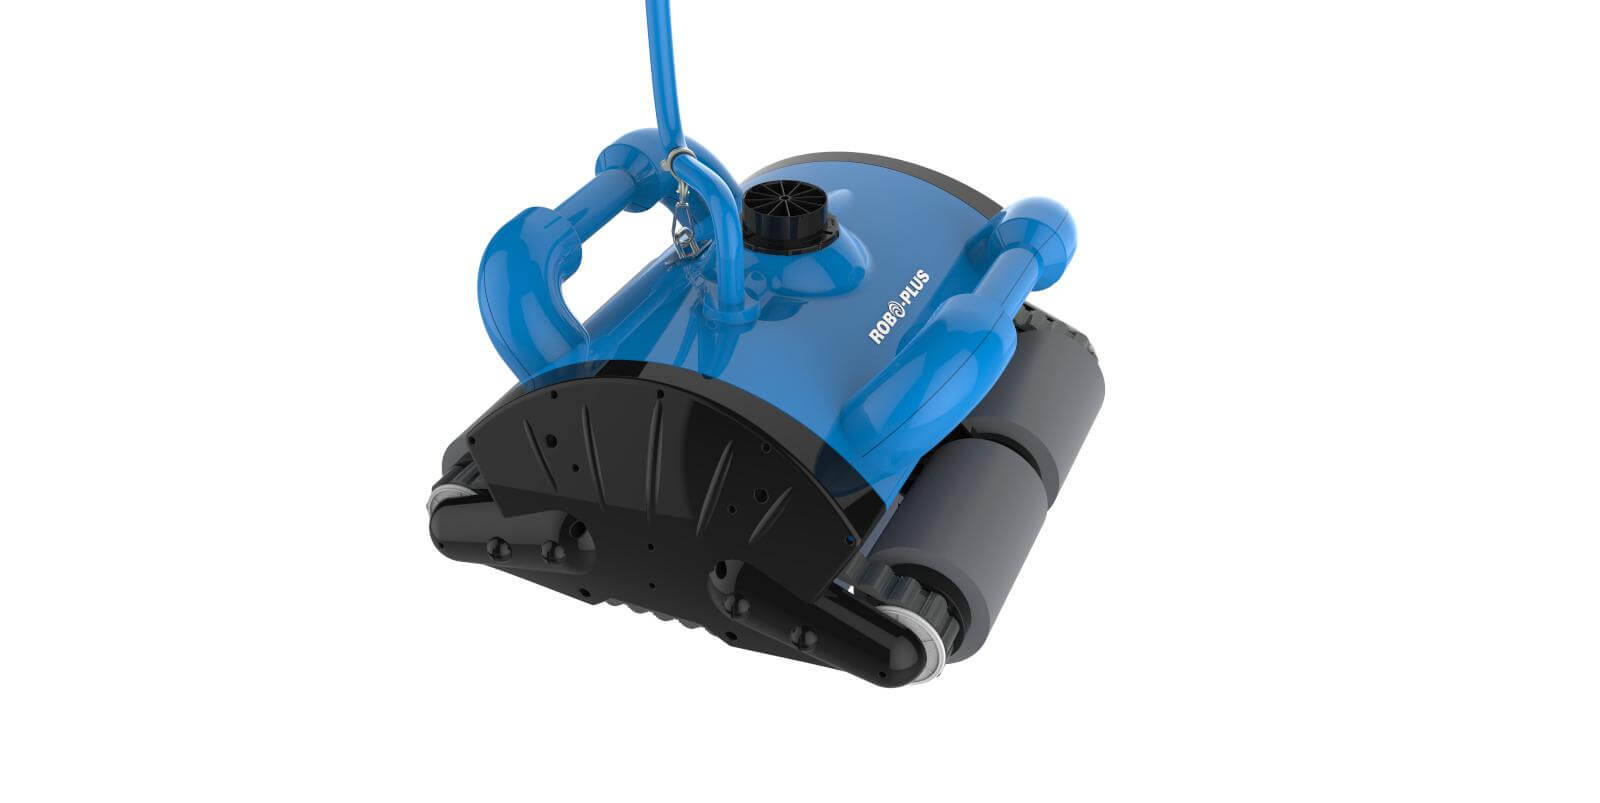 Blue and black Robetek ROBO-PLUS robotic pool cleaner against a white background.